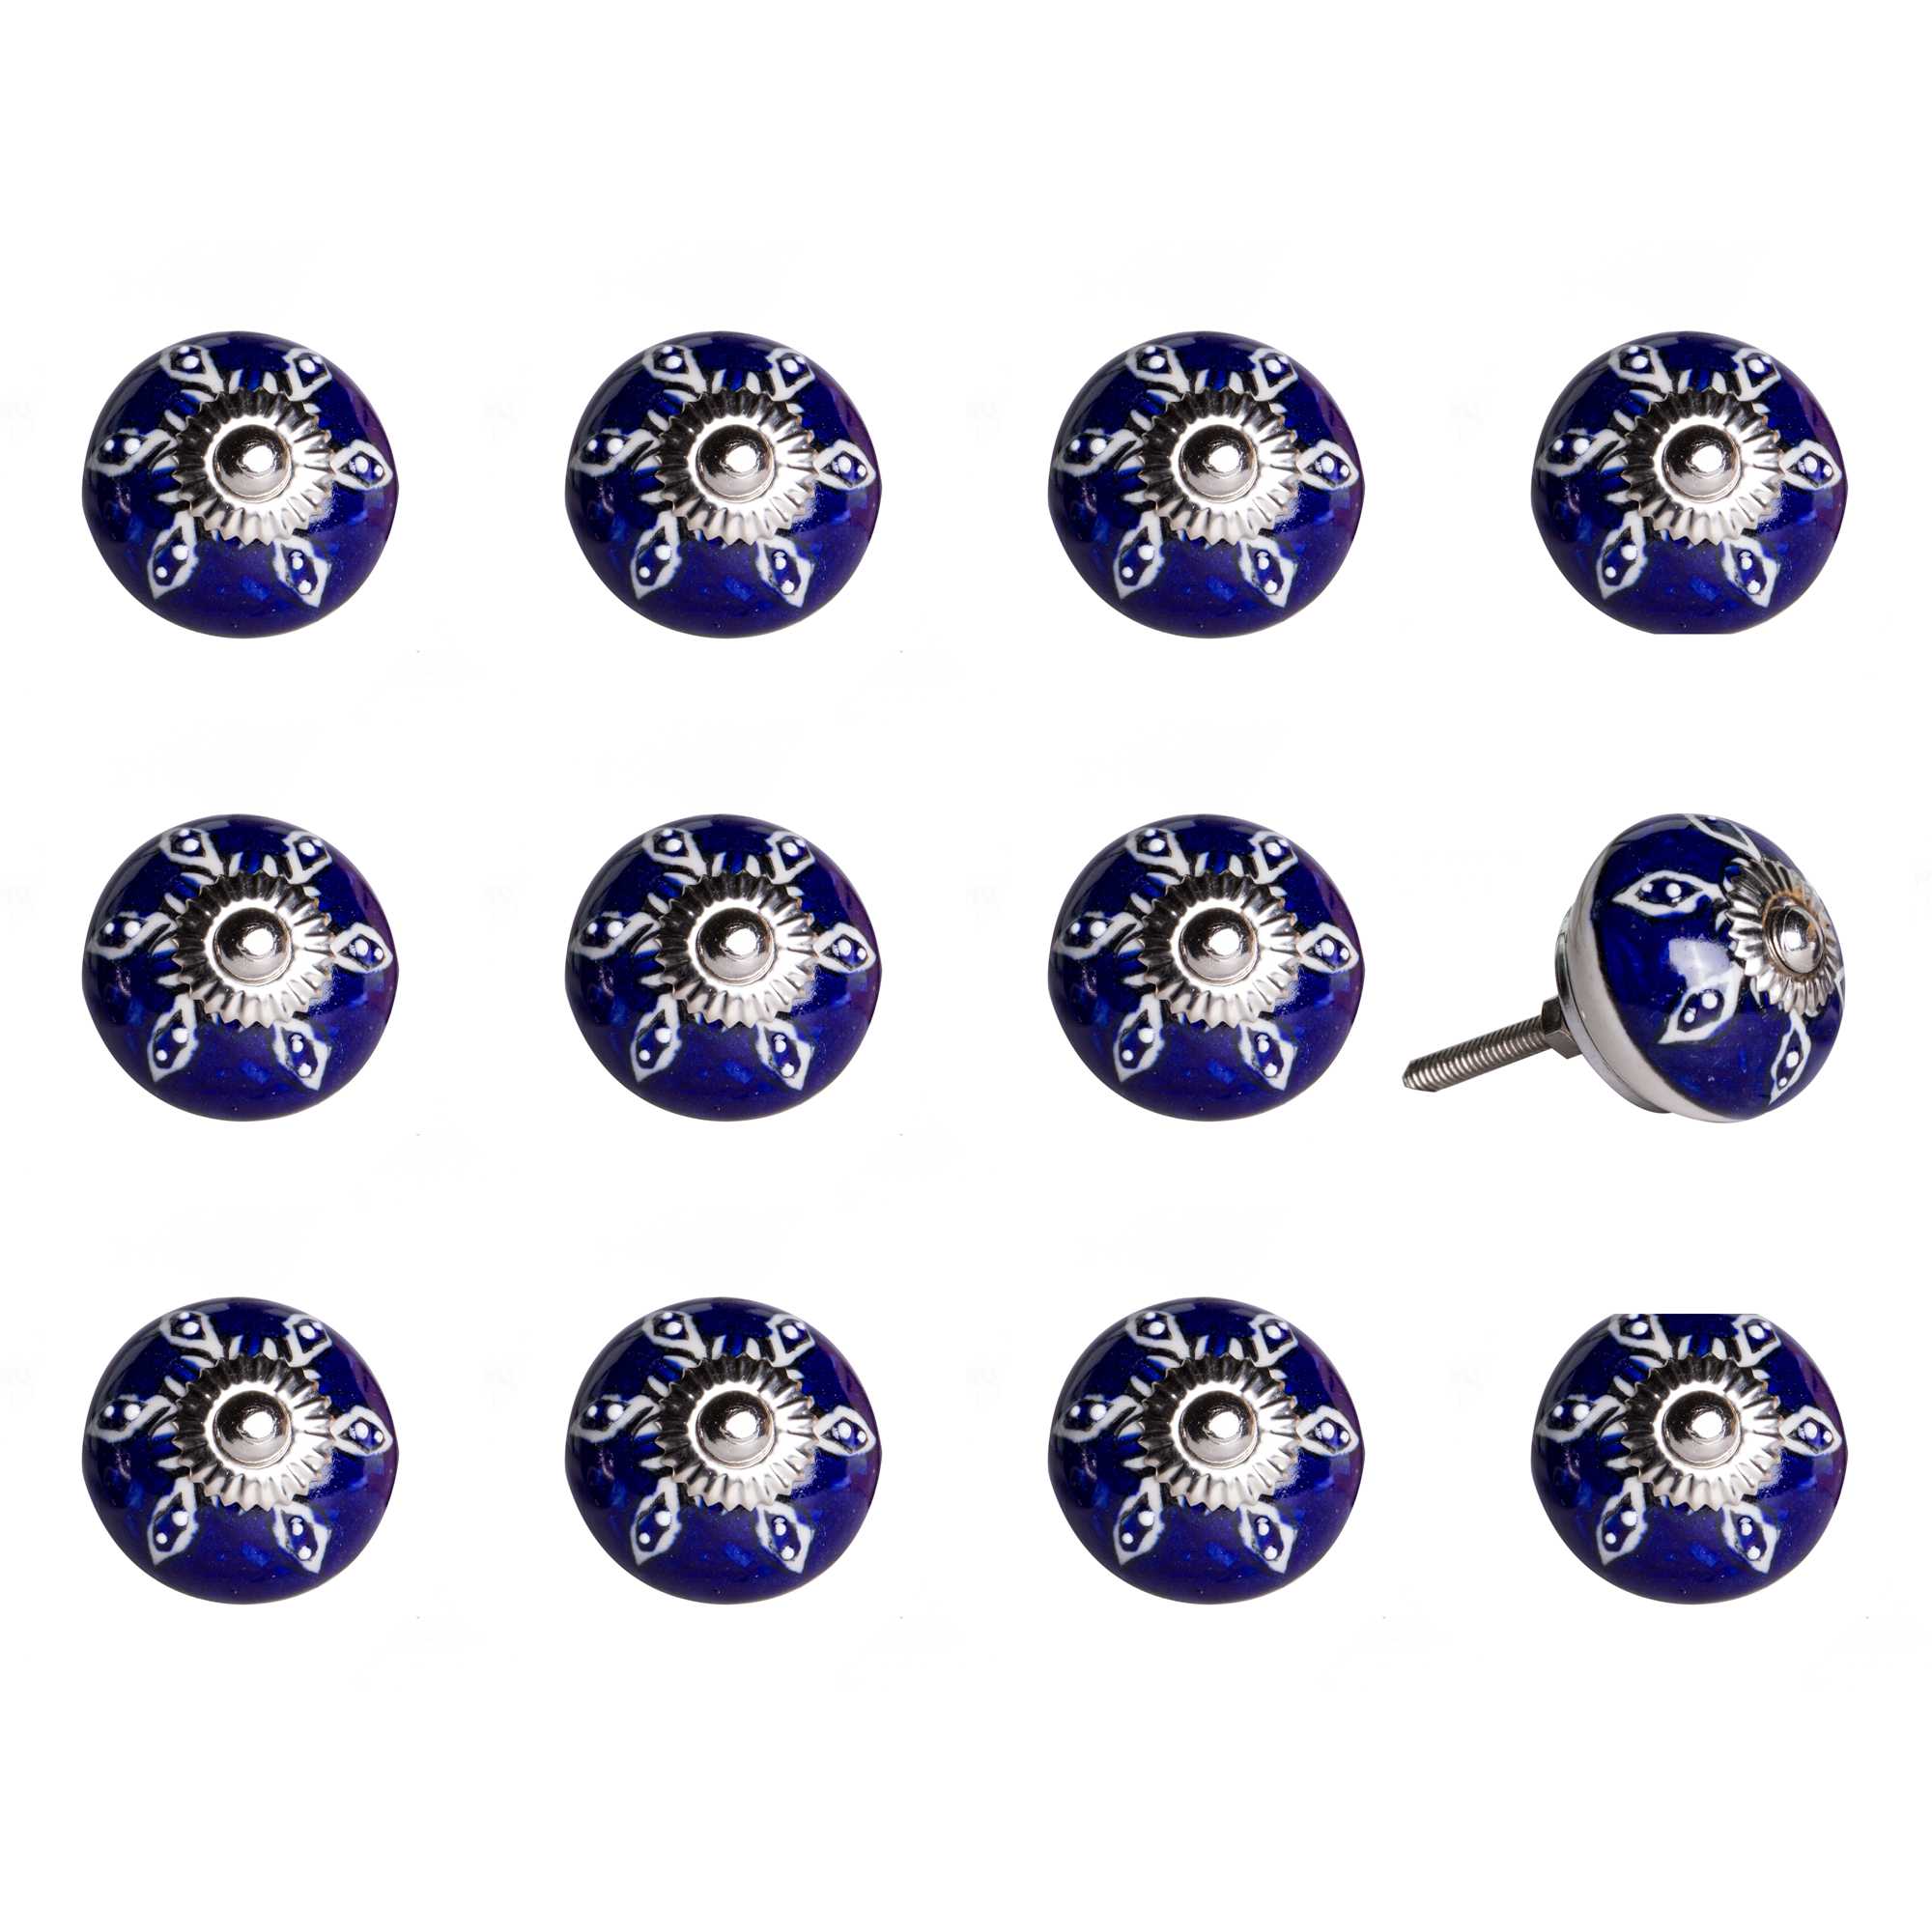 1.5" x 1.5" x 1.5" Navy, White and Silver - Knobs 12-Pack